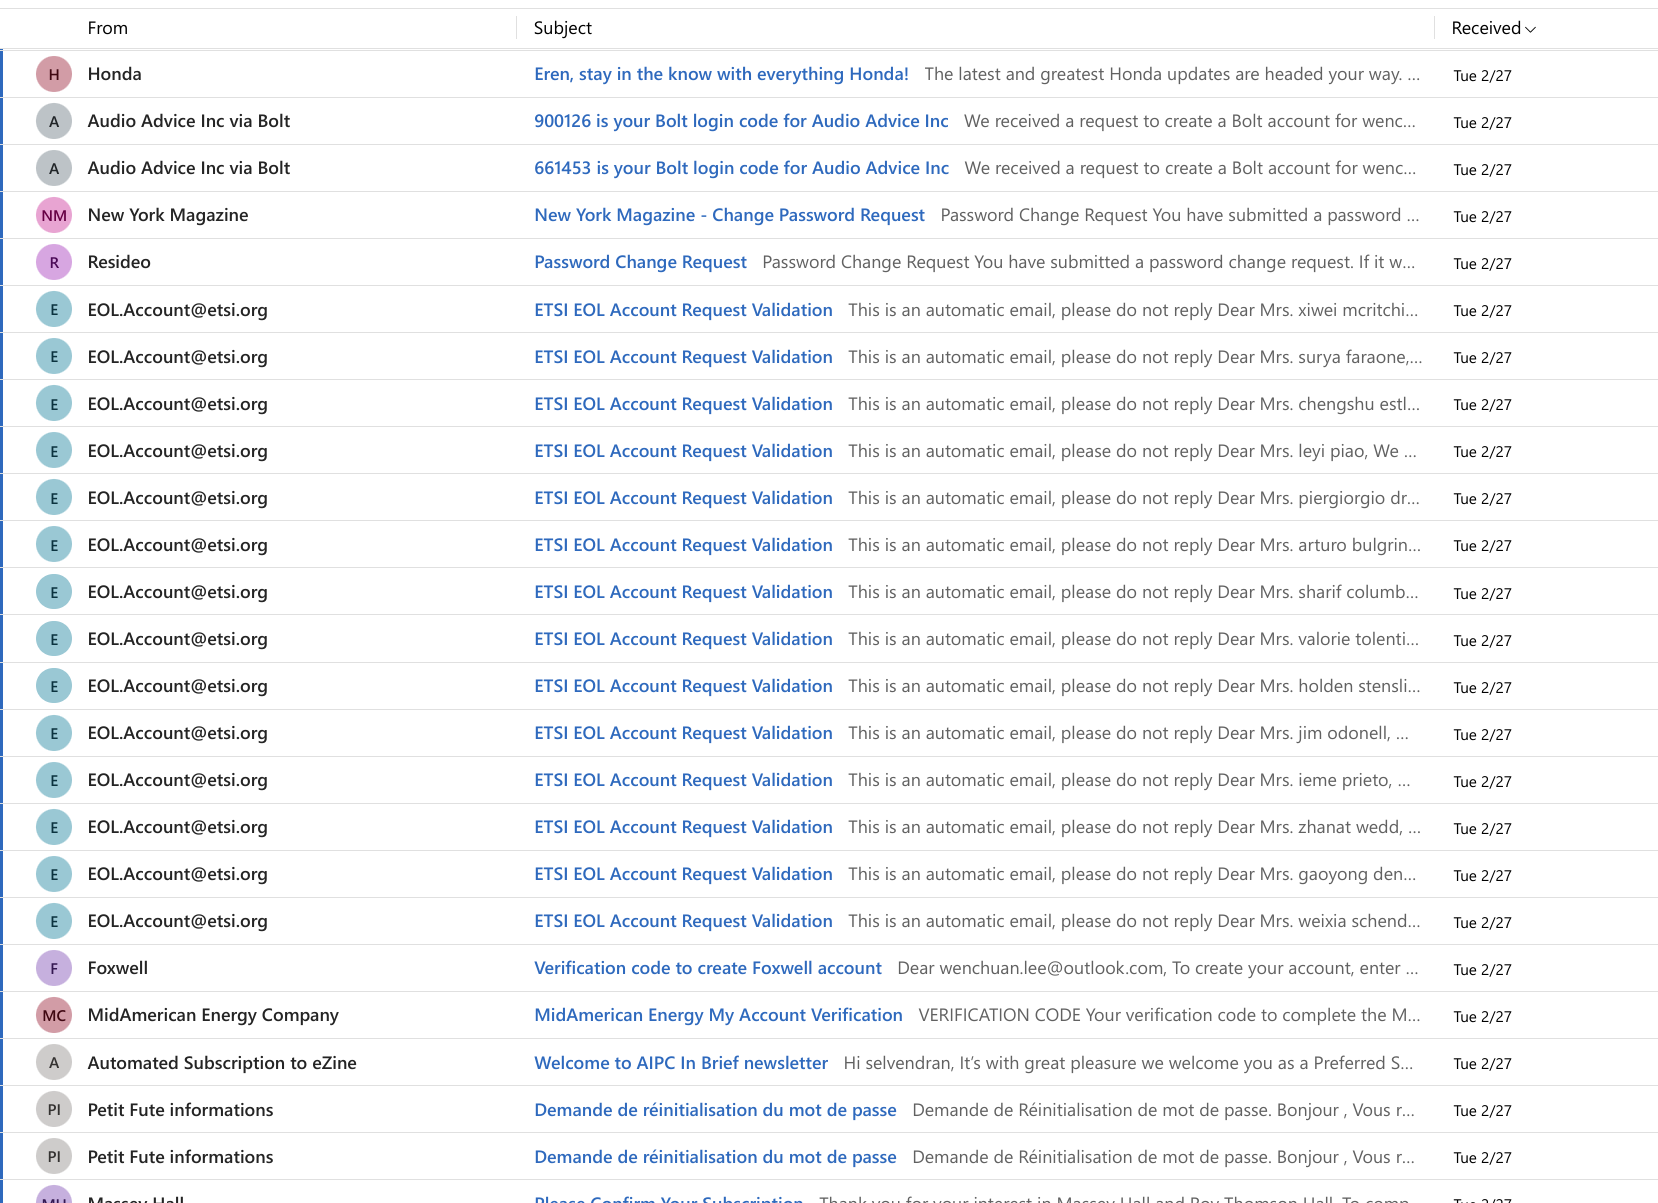 Spam emails